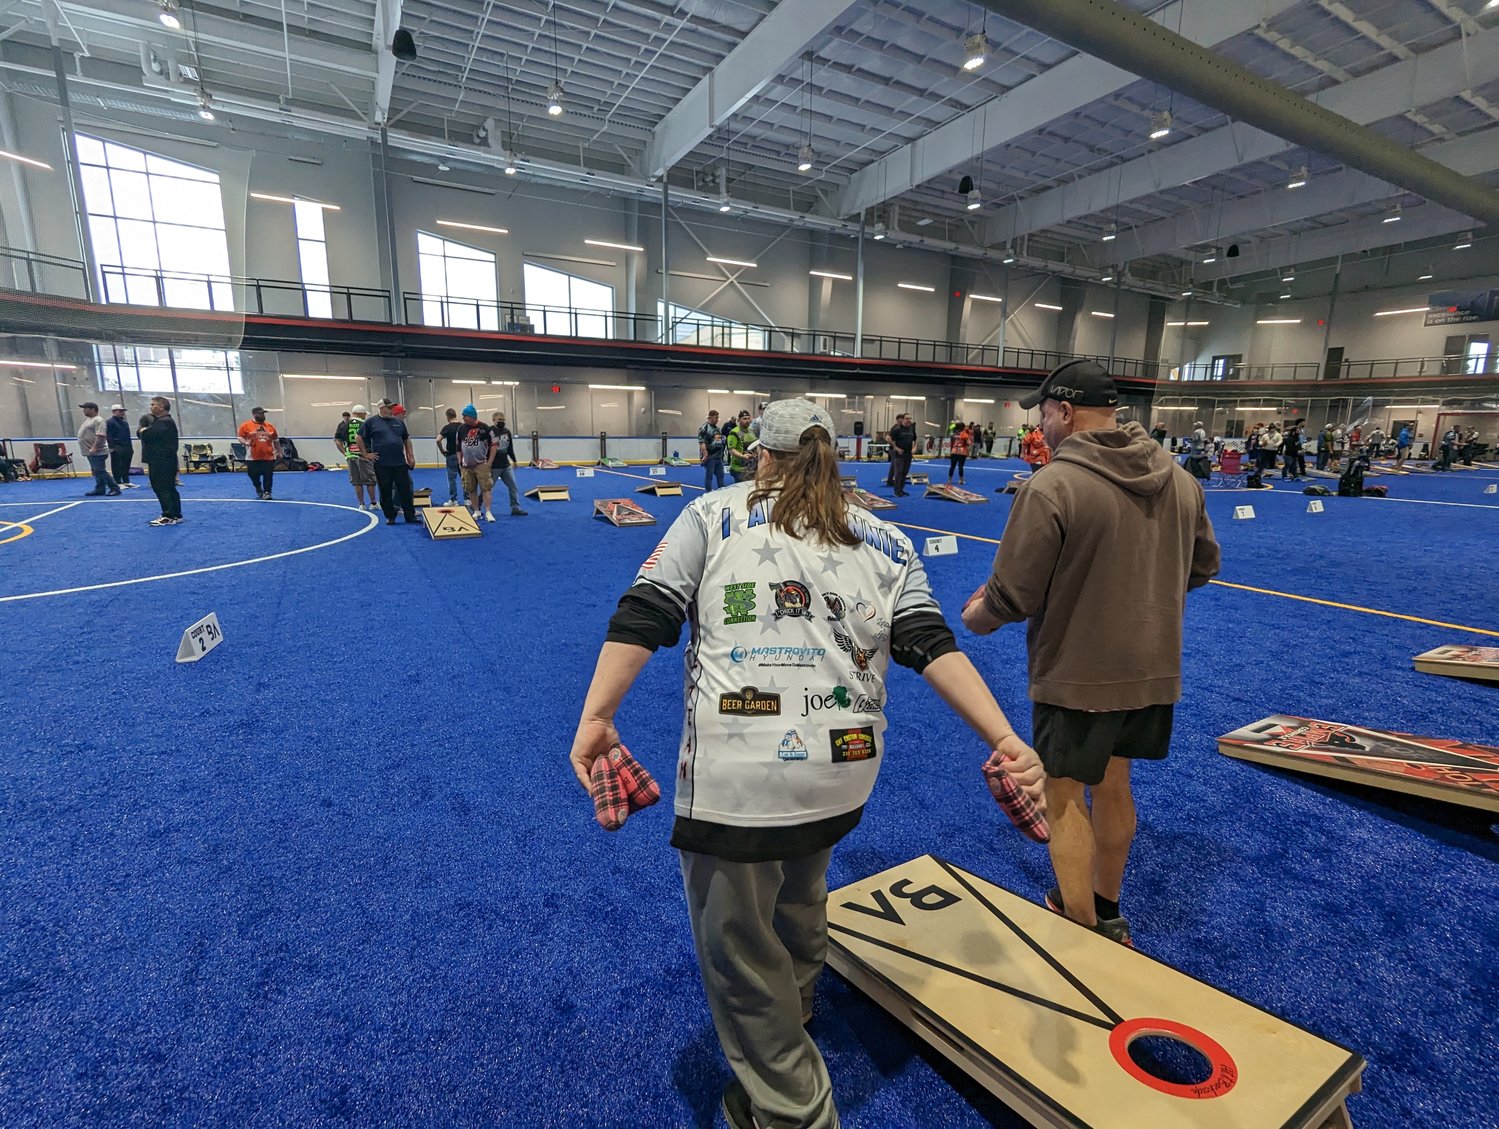 The American Cornhole League welcomes players of all types in their tournaments, both amateurs and professionals.